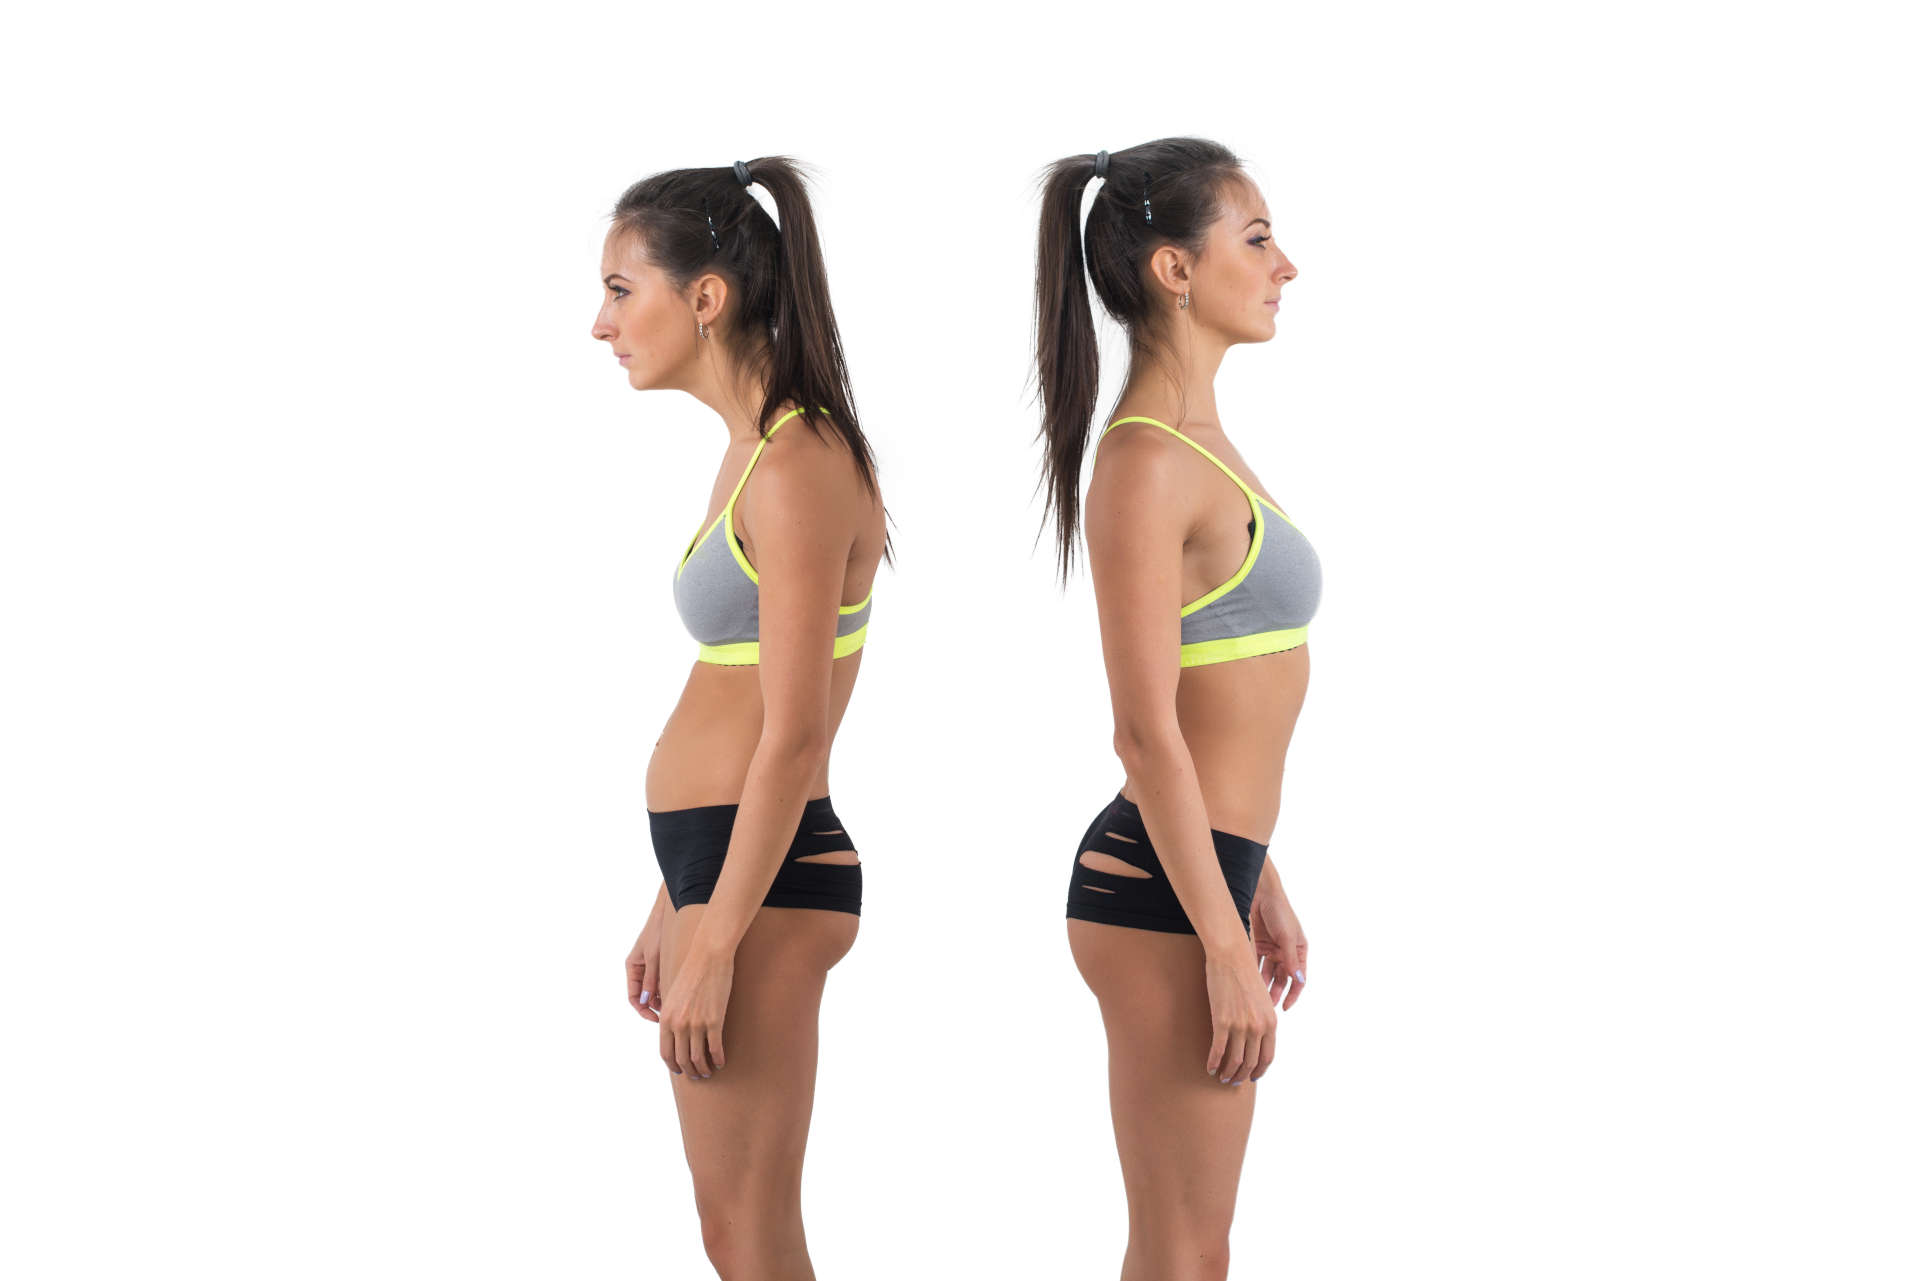 https://asia-chiropractic.com/wp-content/uploads/2018/09/Woman-with-impaired-posture-position-defect-scoliosis-and-ideal-bearing.jpeg